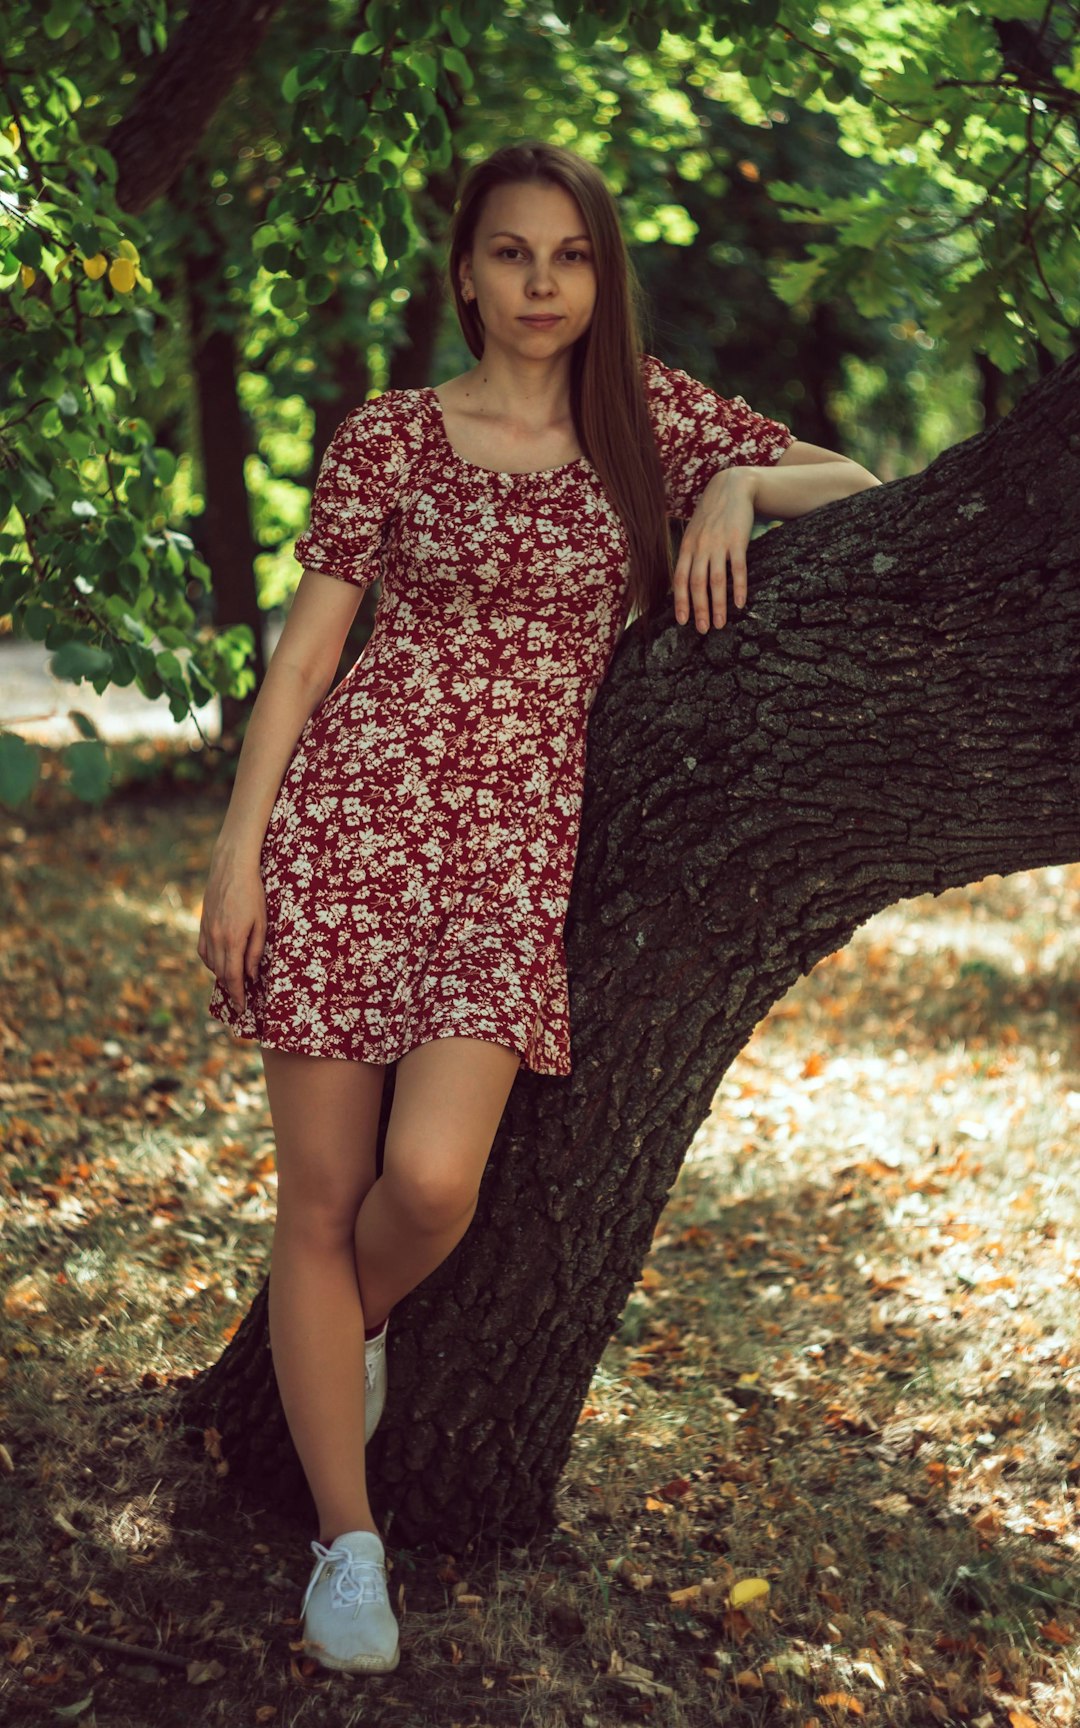 woman in red and white floral dress leaning on tree